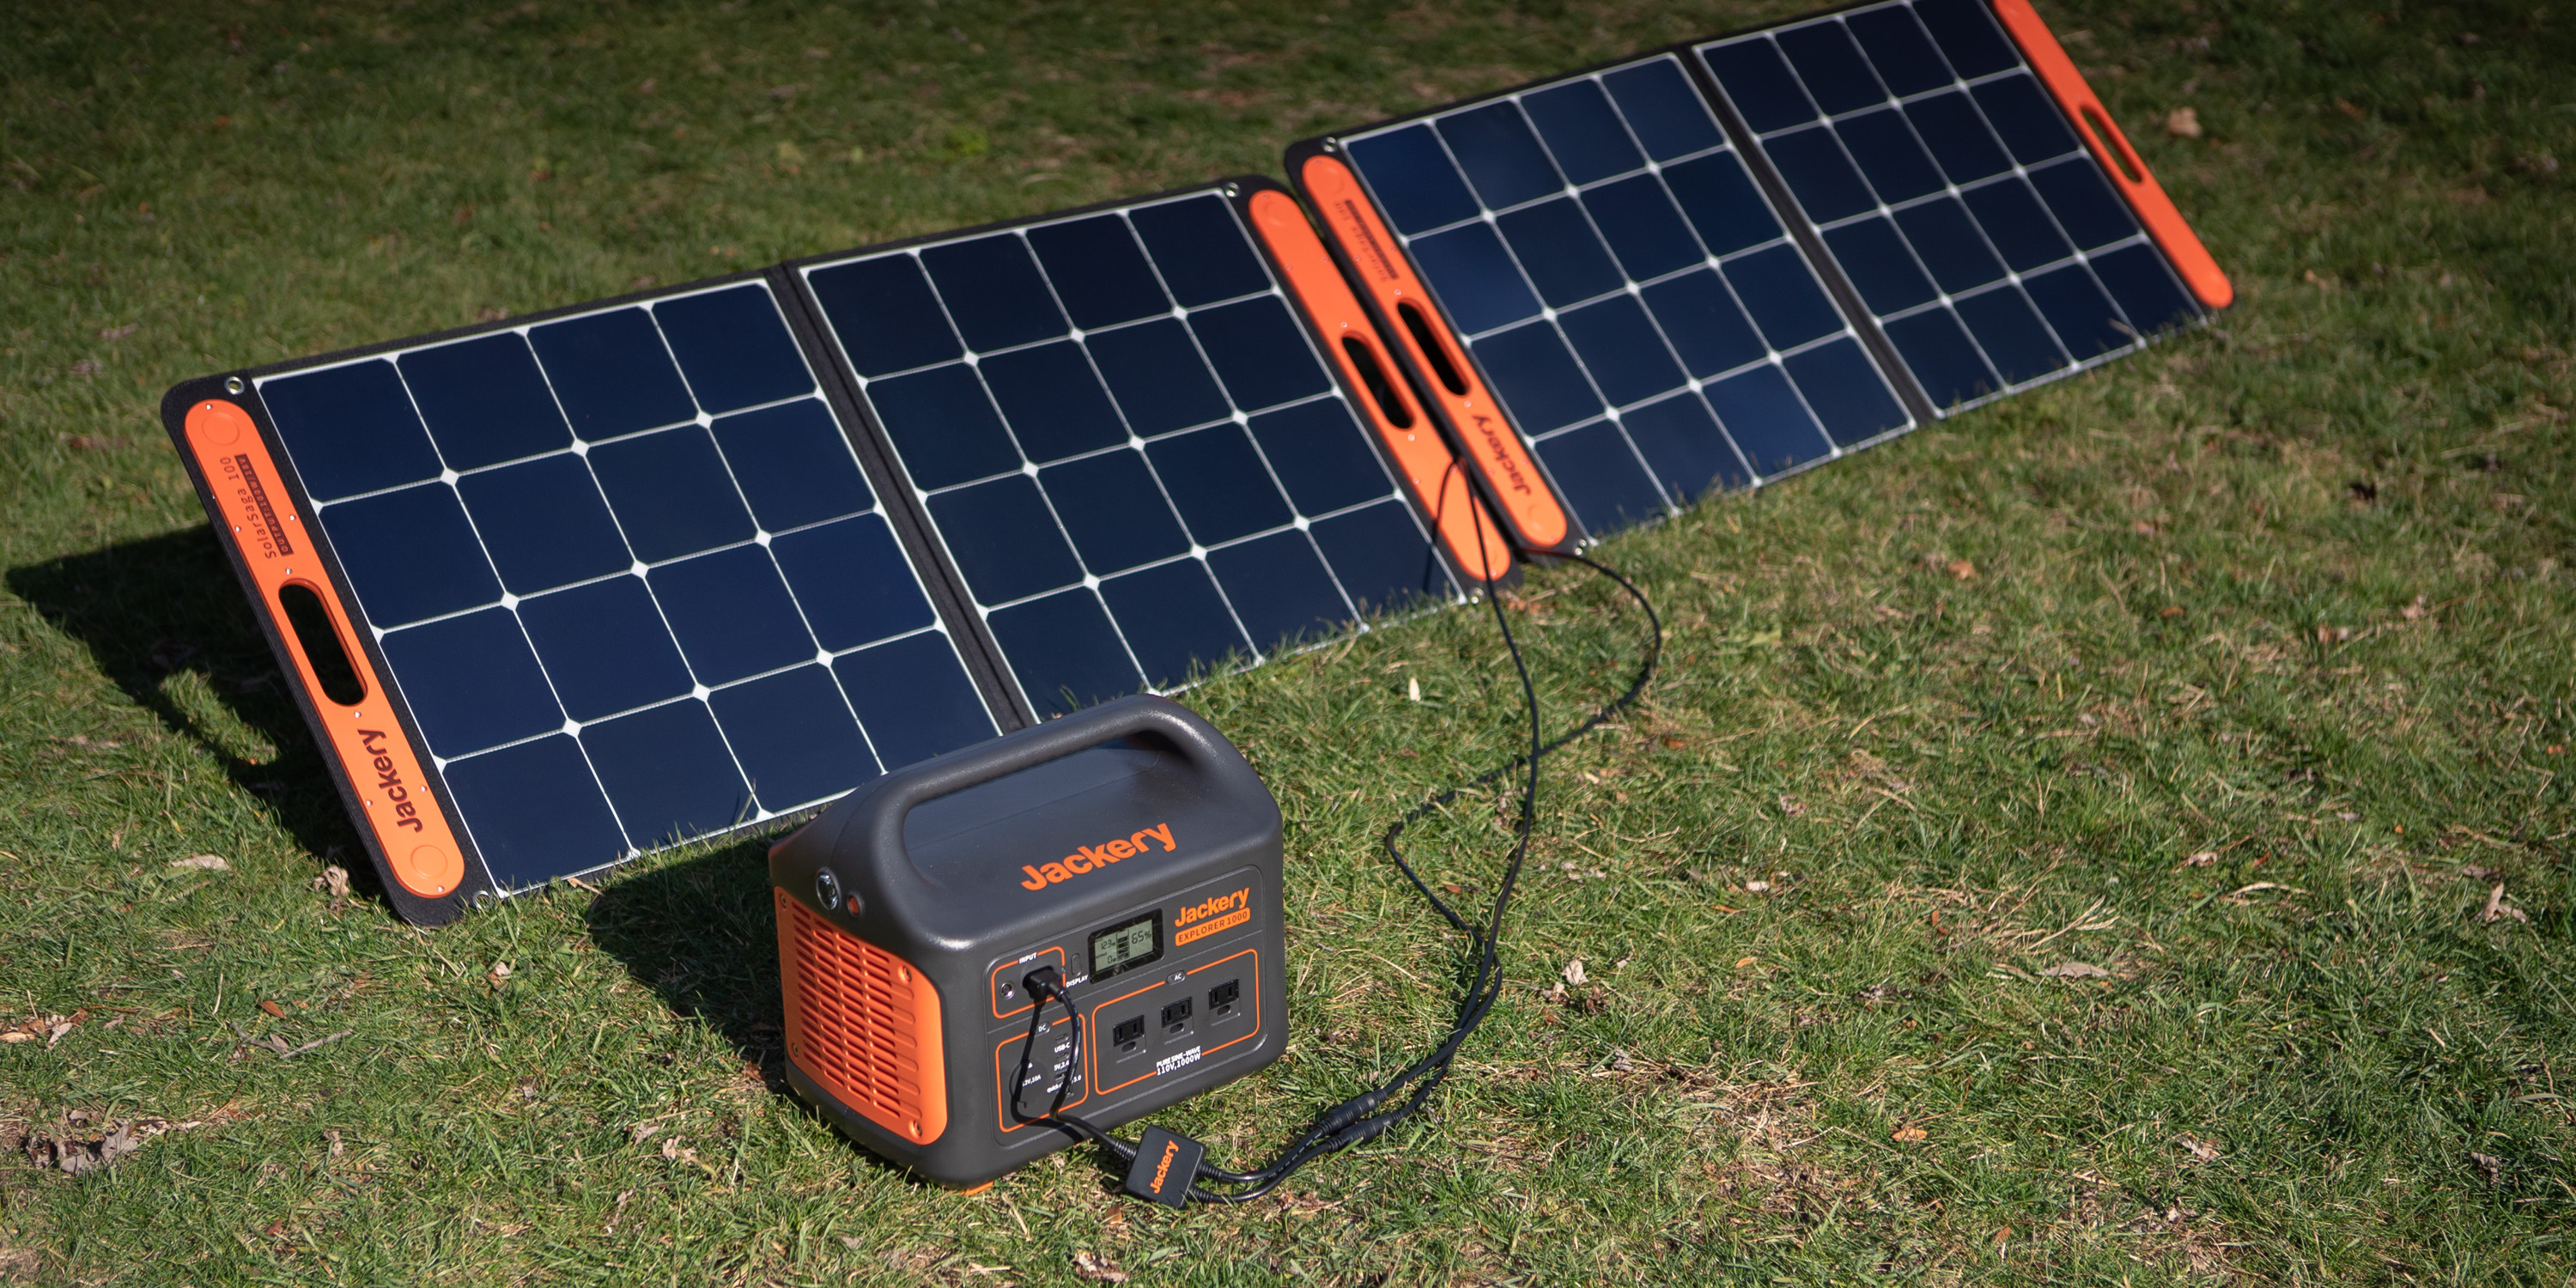 Jackery Solar Generator 1000 kit: Hands-on for the 8th-anniversary sale